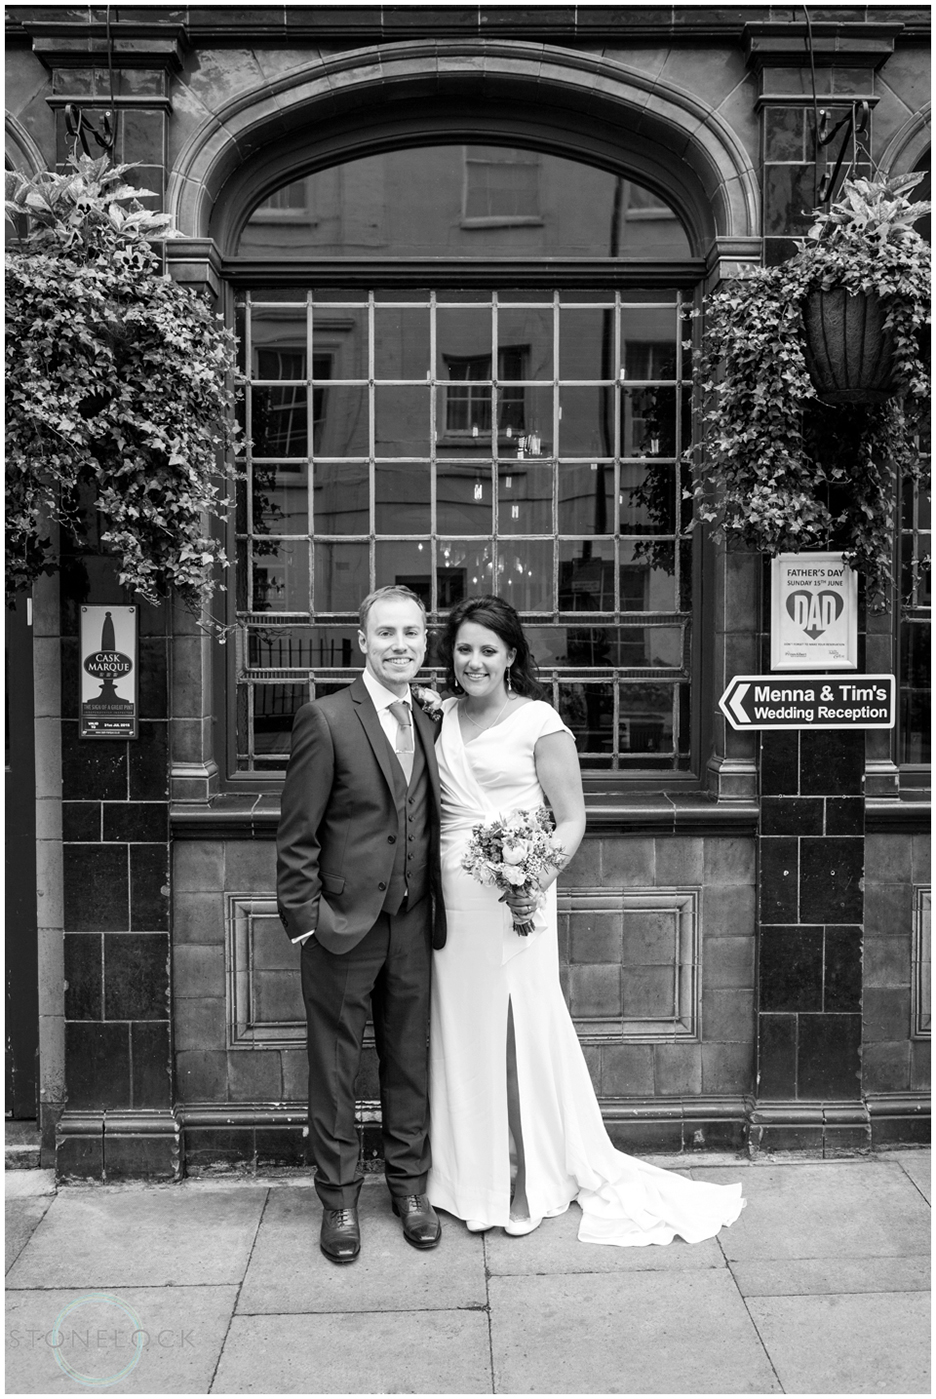 The bride and groom at the Prince Albert Pub in Camden, North London